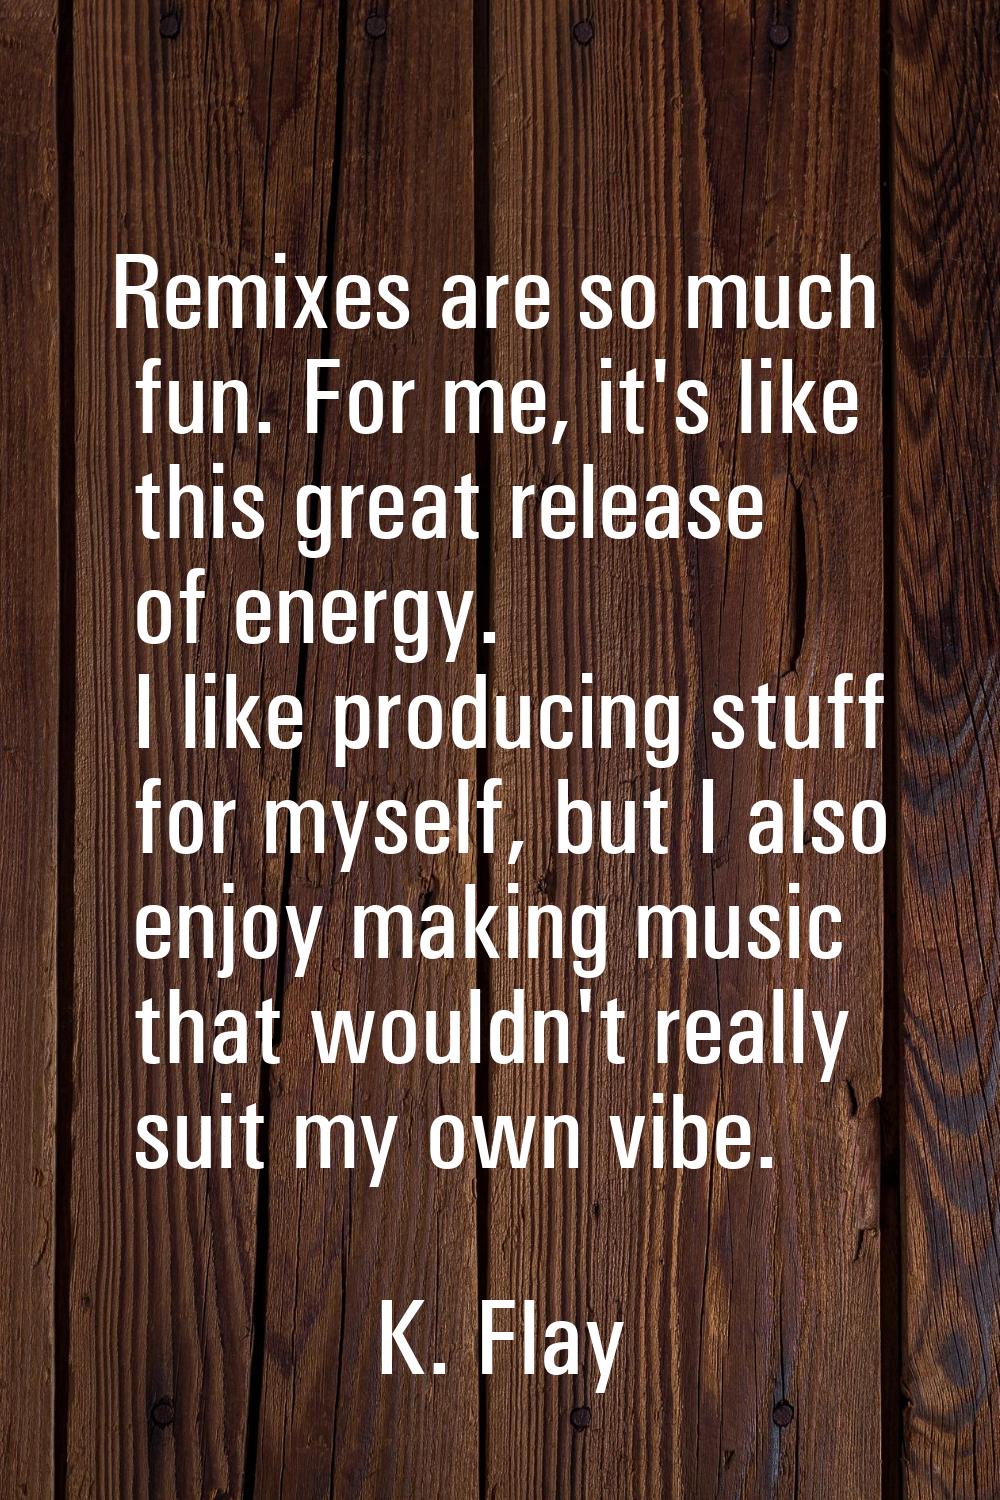 Remixes are so much fun. For me, it's like this great release of energy. I like producing stuff for